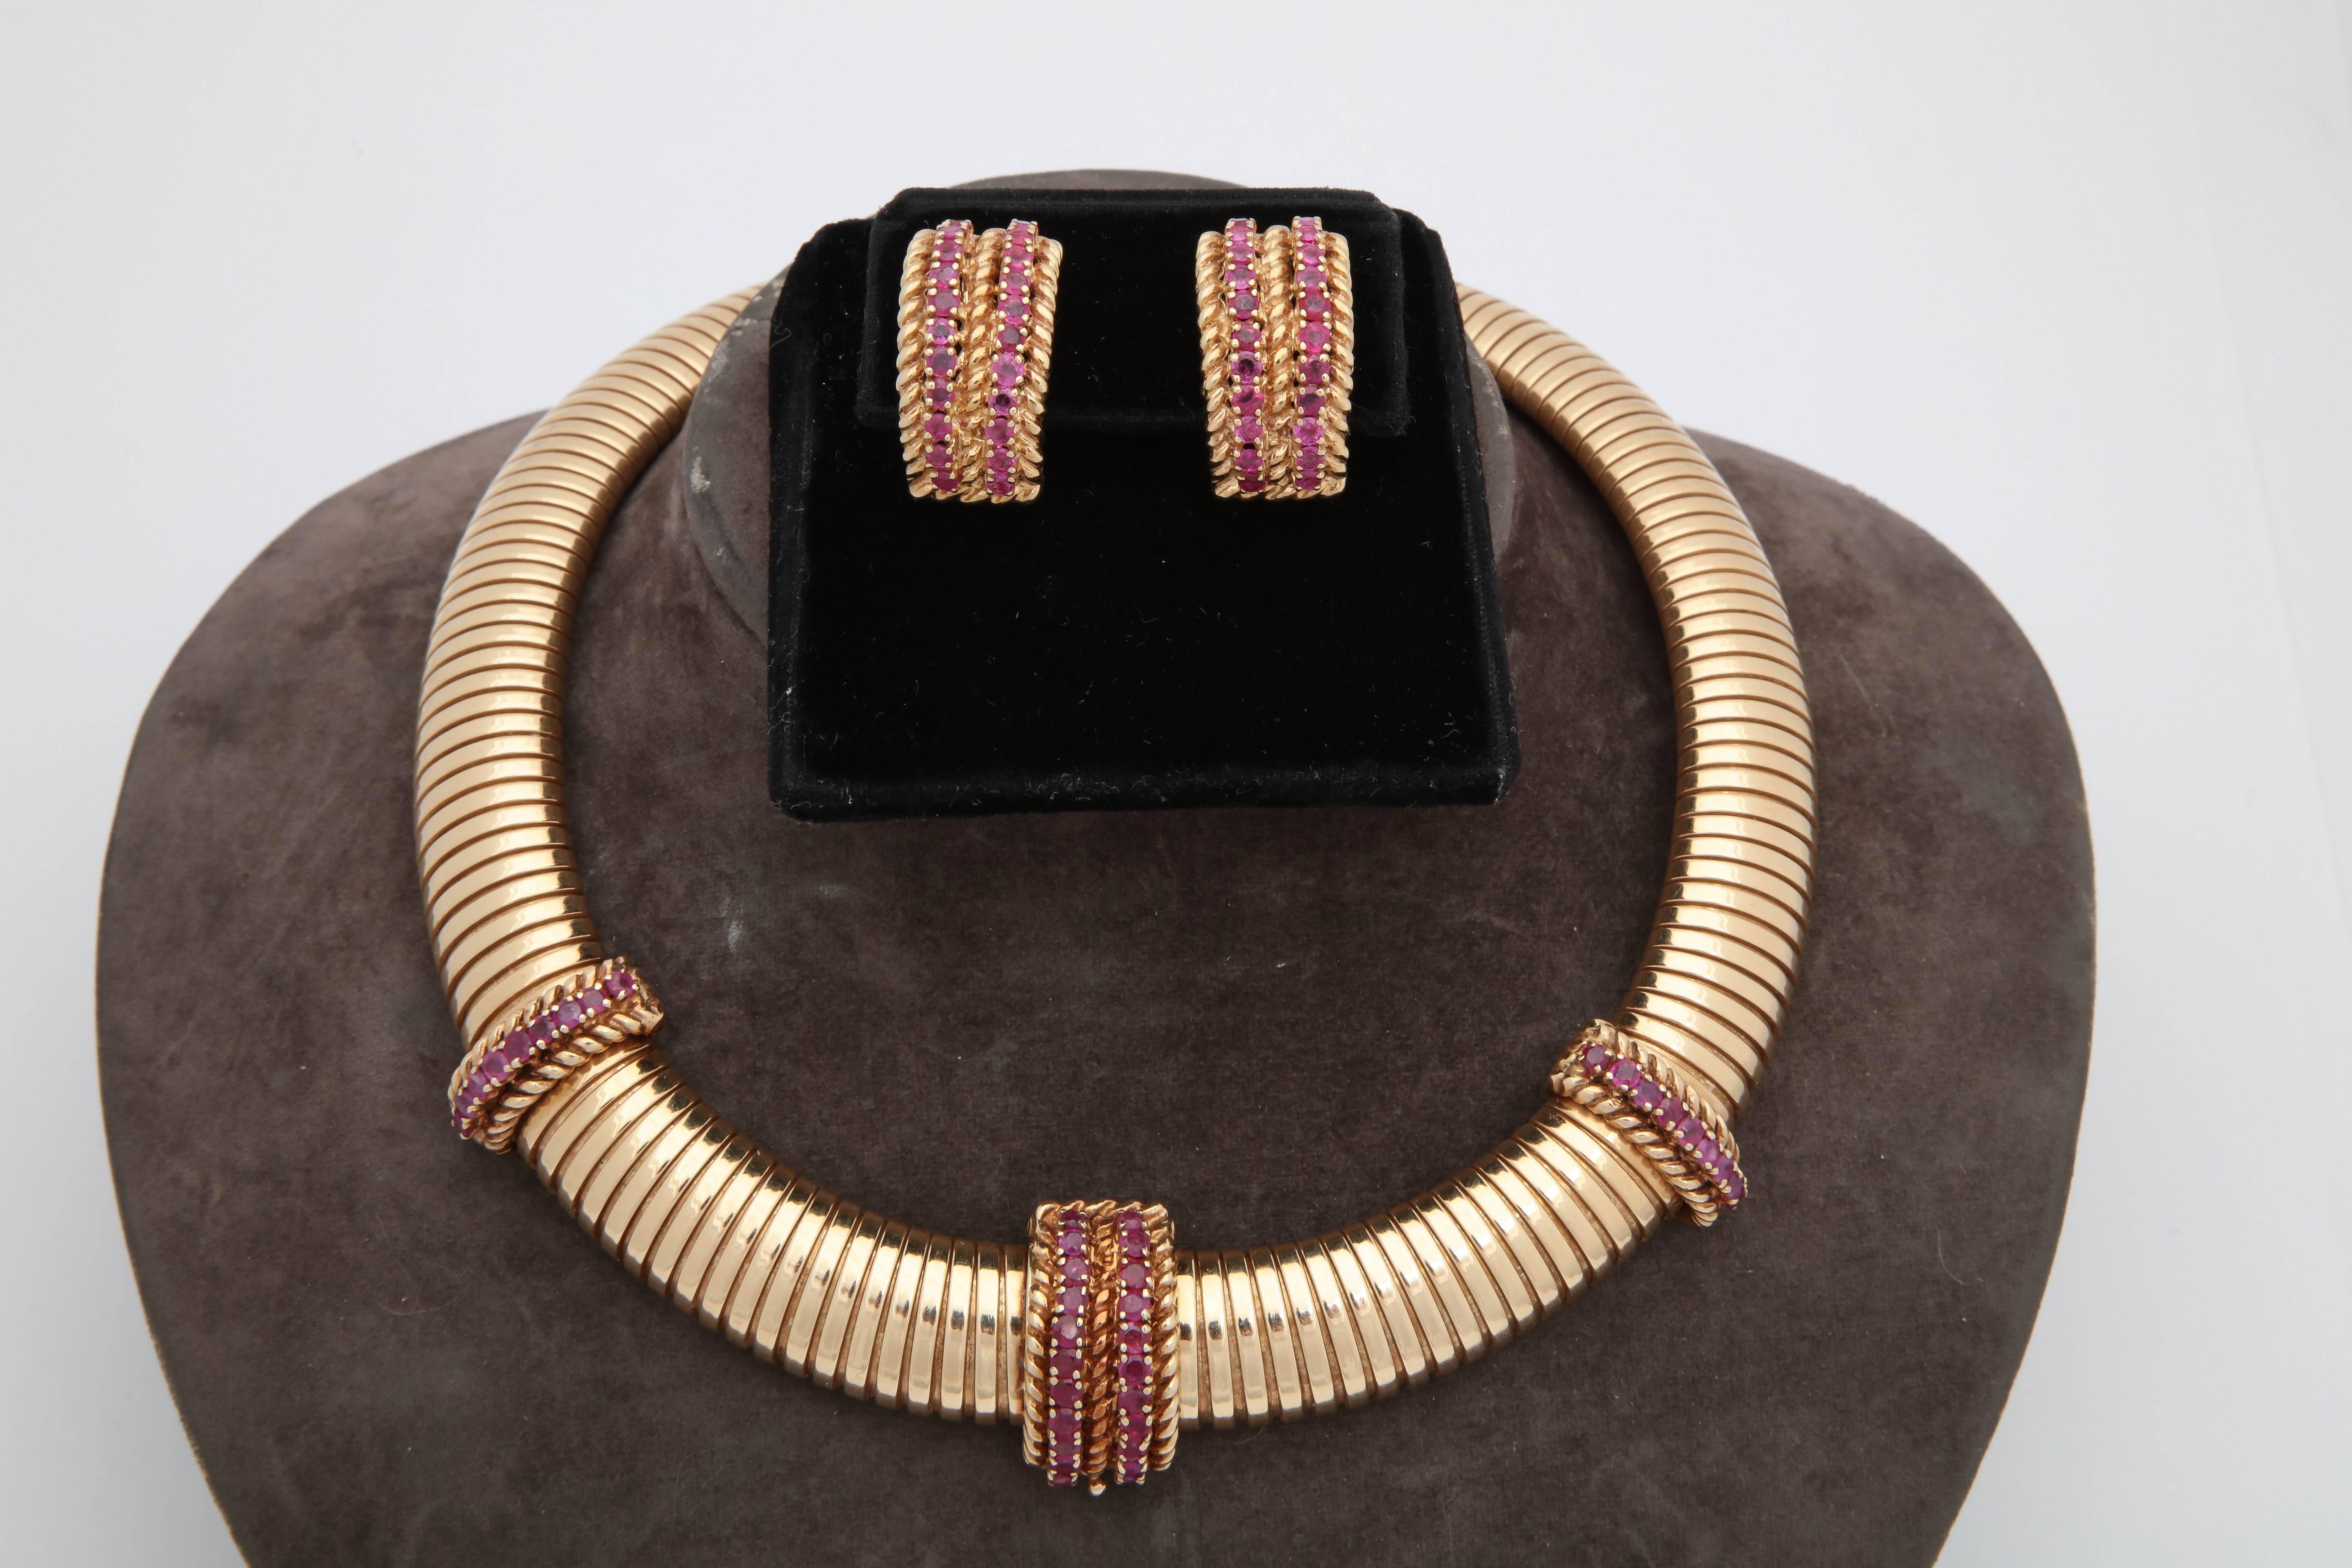 One Ladies 14kt Gold Three Dimensional,Tubular Gaspipe Necklace With Easy Fastener For Clasp Which May Be Worn In The Front. 14kt Gold Clasp Is embellished With Numerous  Faceted Rubies Weighing Approximately 2.40 Cts. The Choker Style Necklace Is